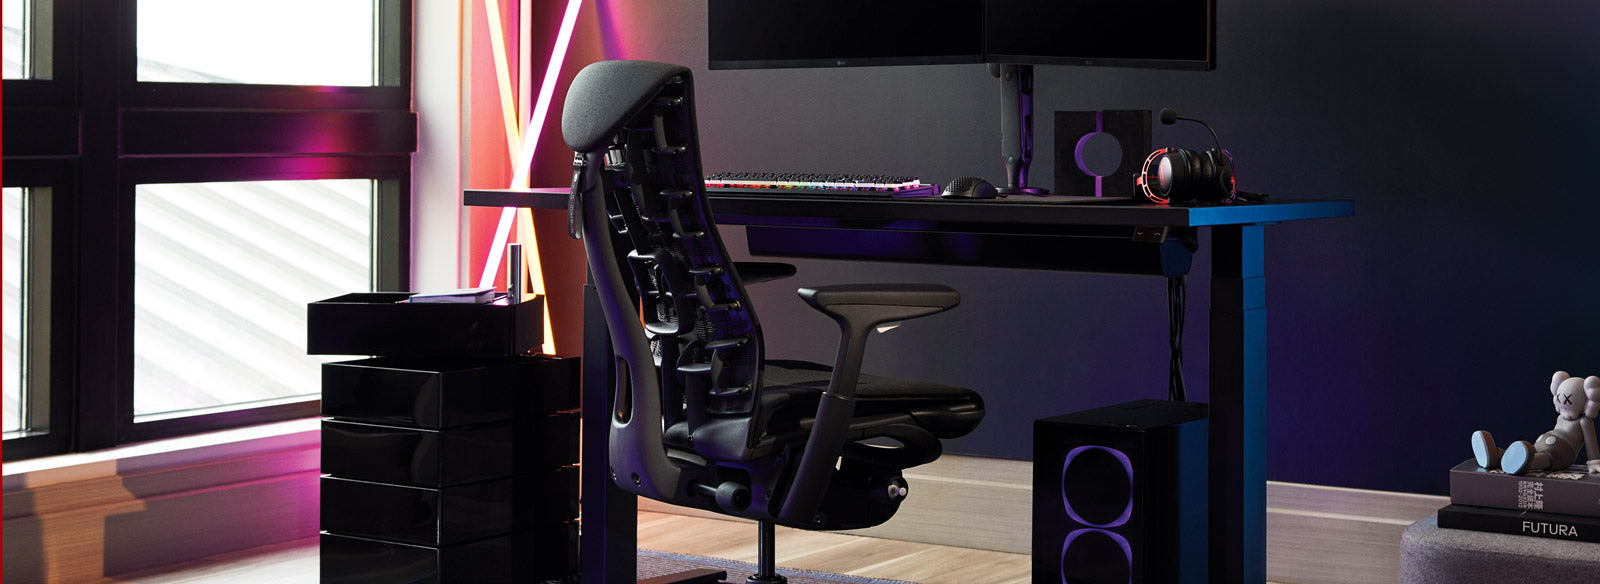 A Herman Miller Embody Gaming Chair as part of a setup featuring a Nevi sit-stand desk